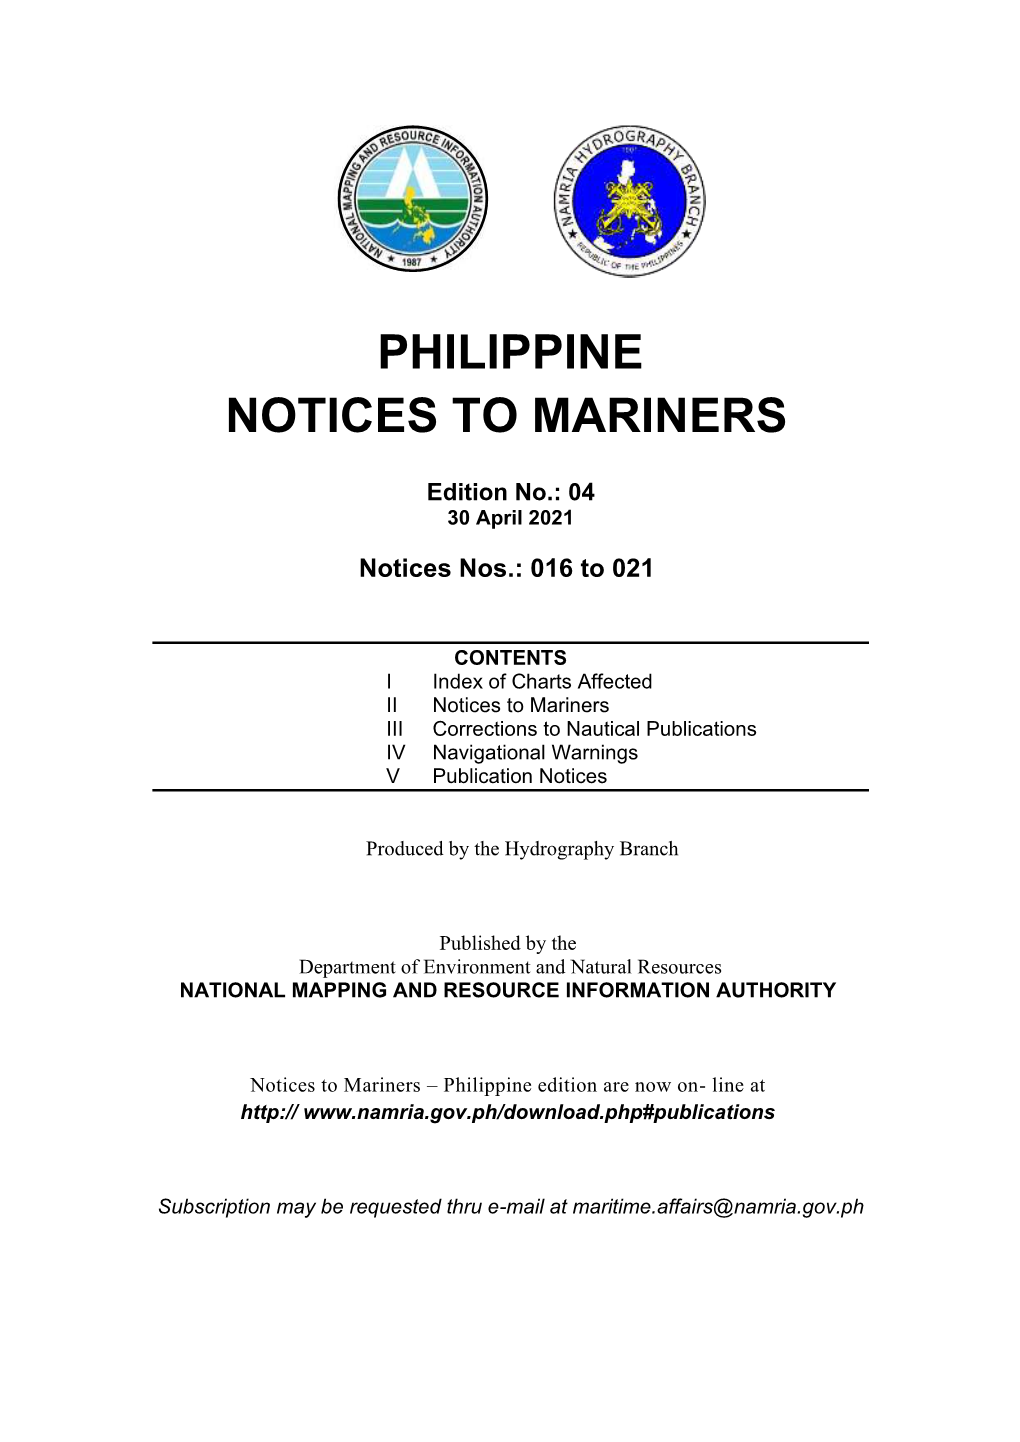 Philippine Notice to Mariners April 2021 Edition